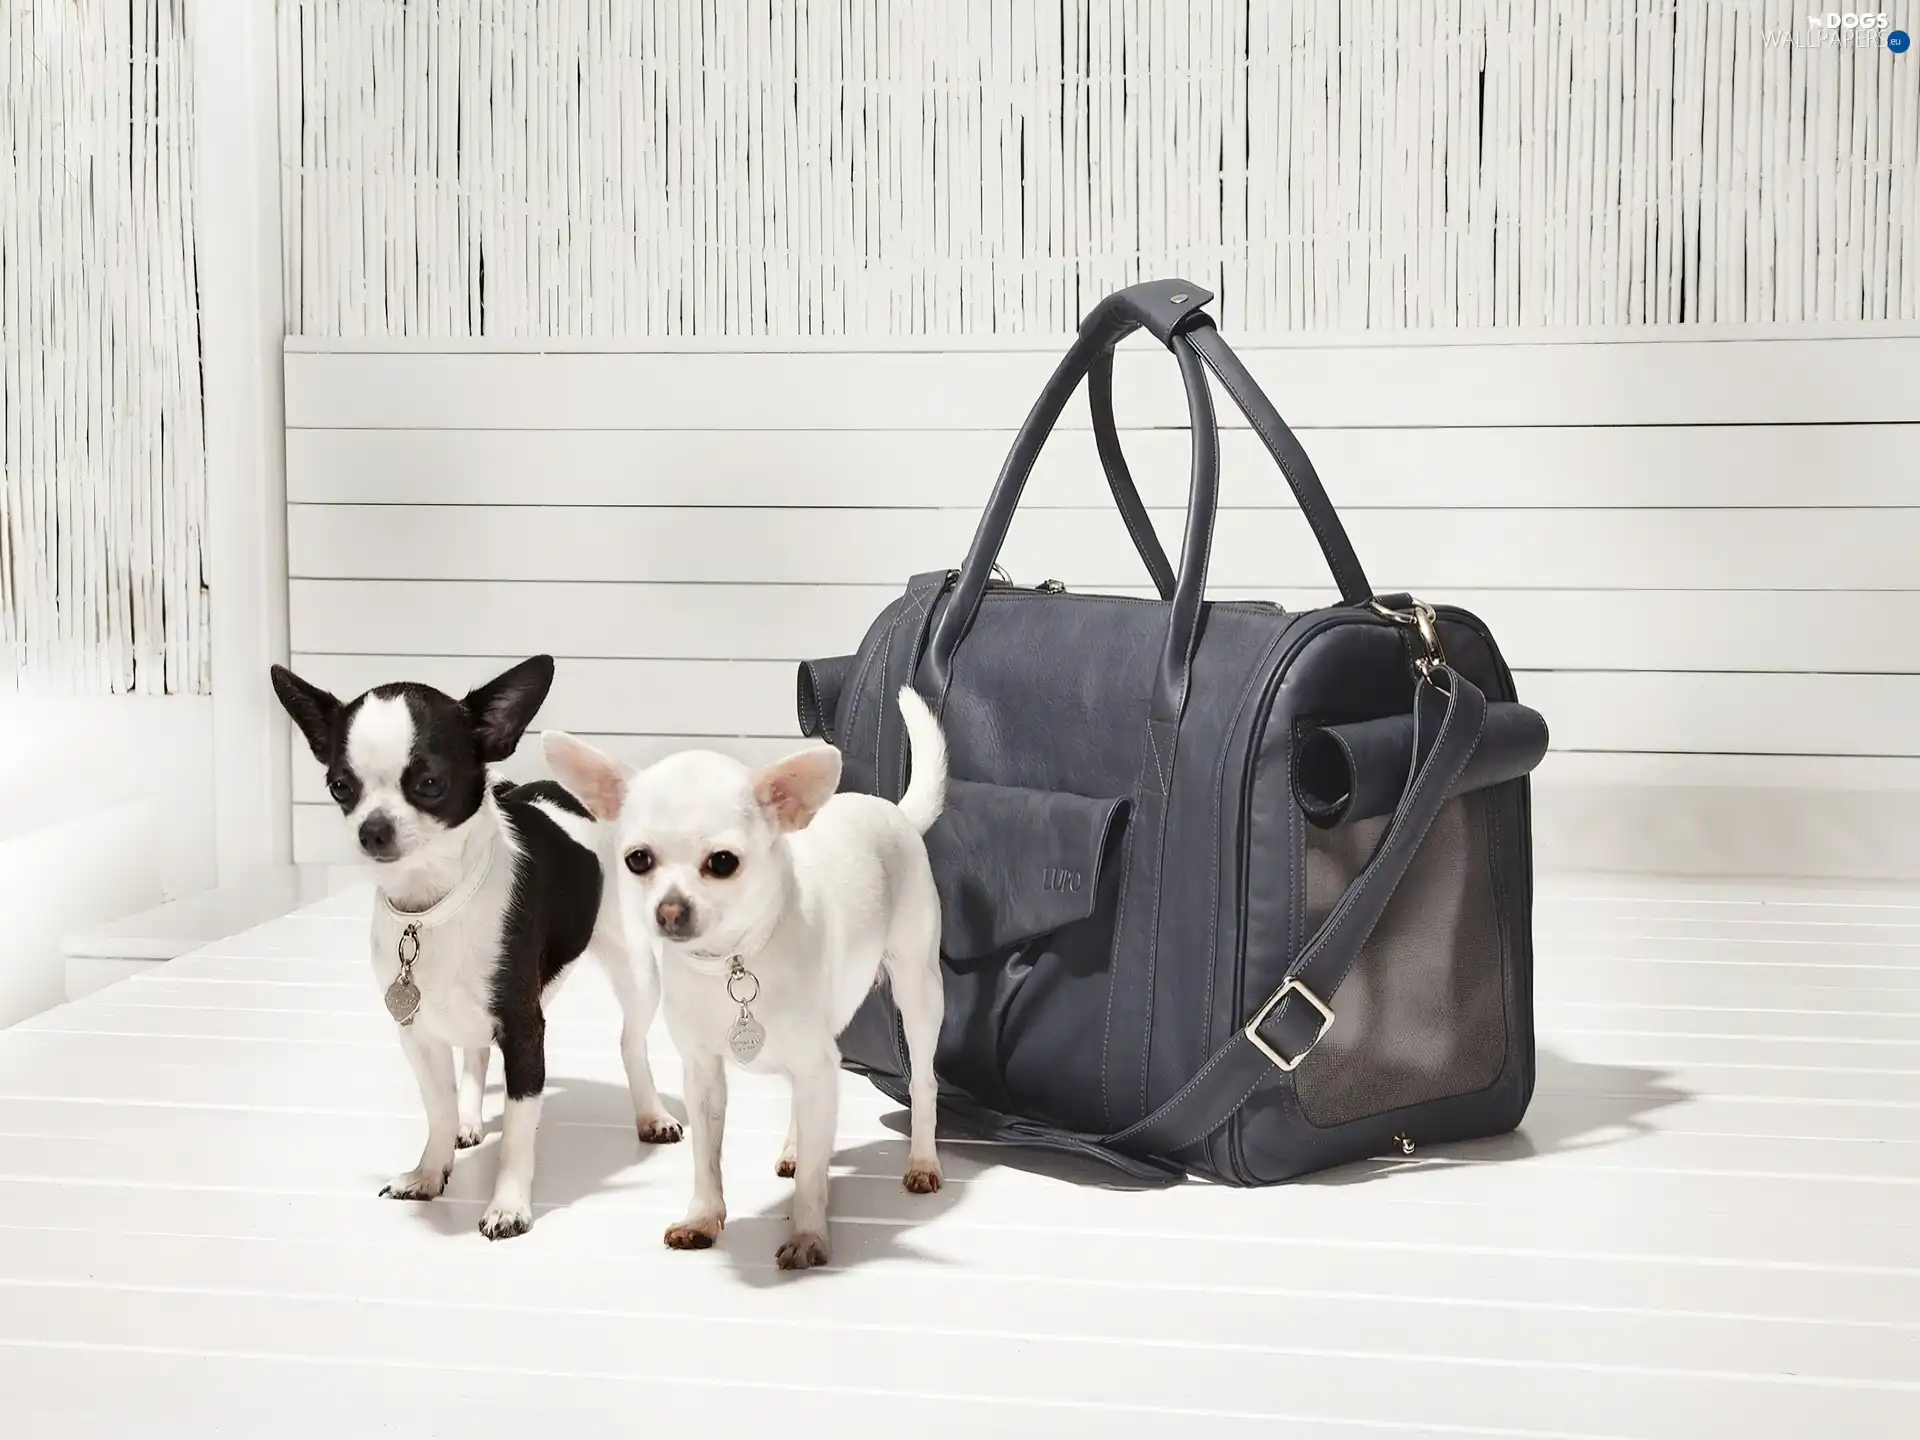 bag, Leather, Two, Chihuahua